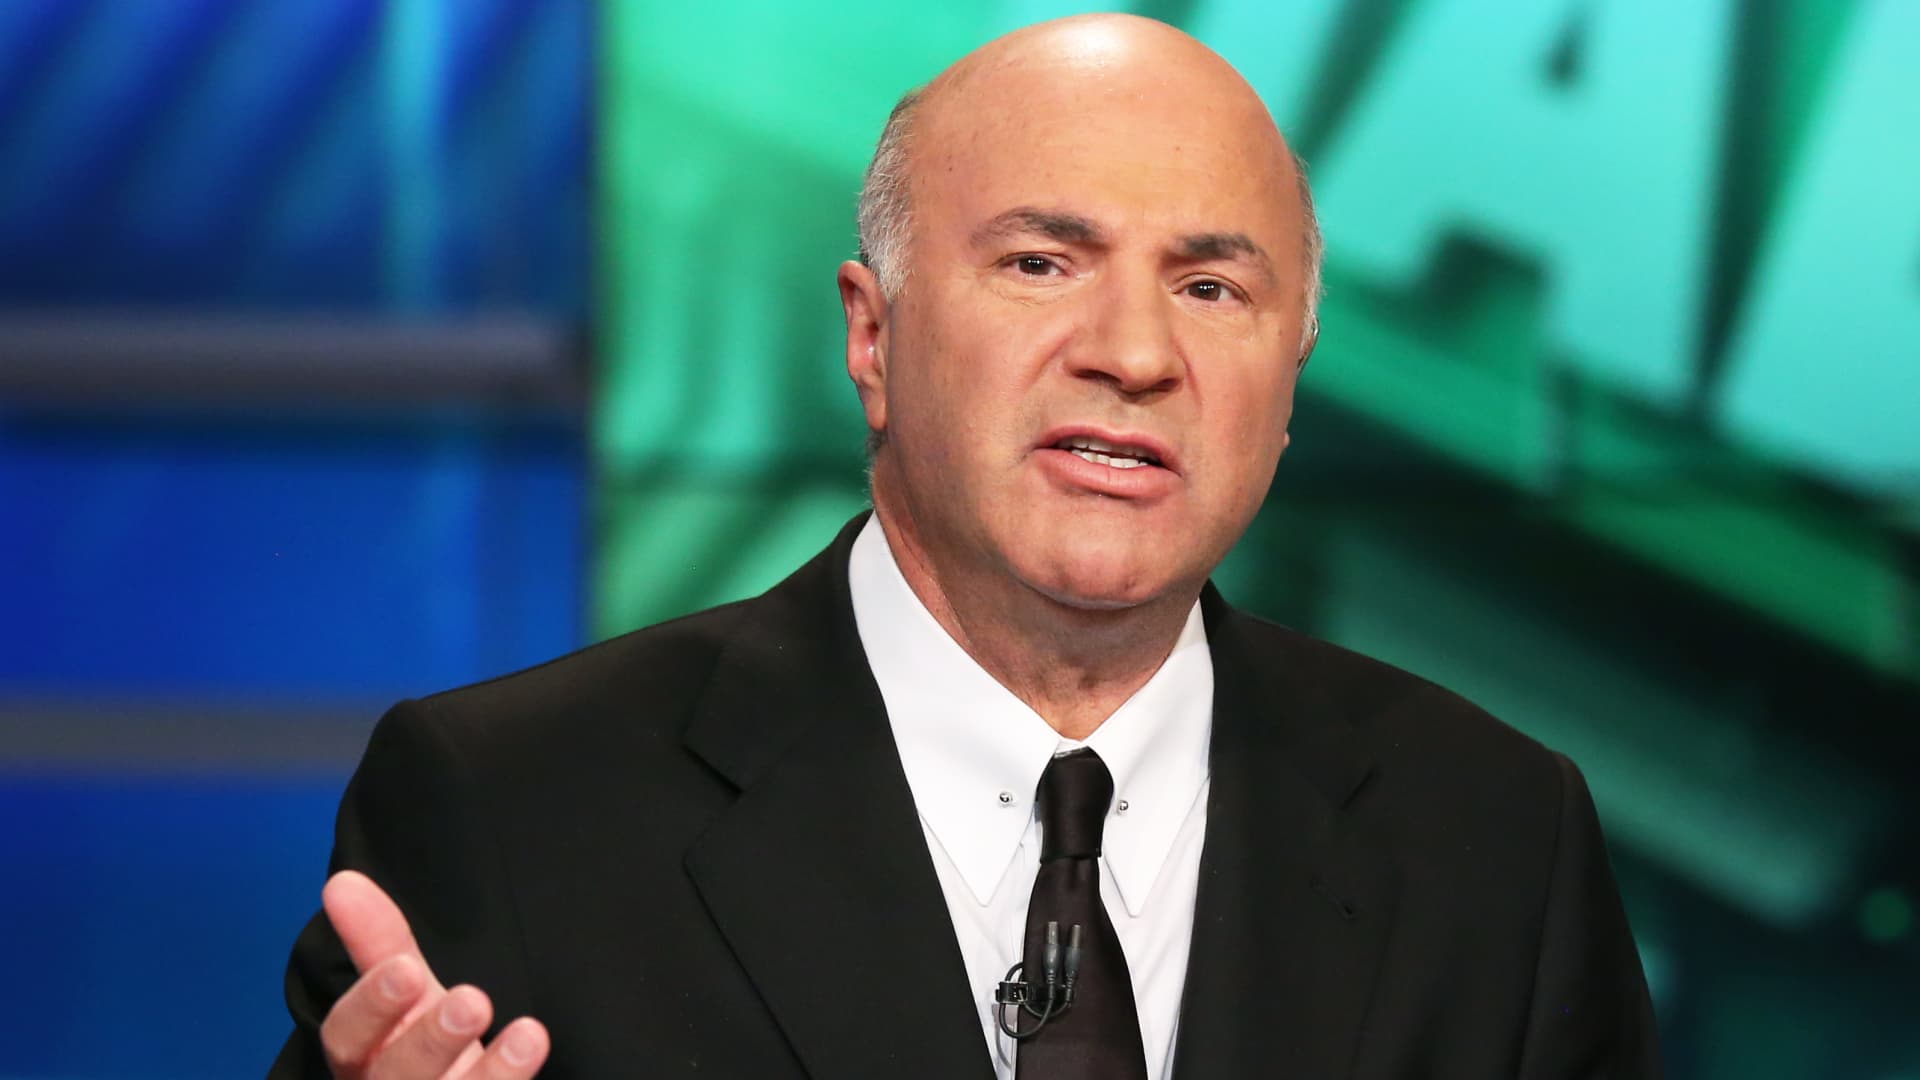 Kevin O’Leary says he won’t be buying bonds for now